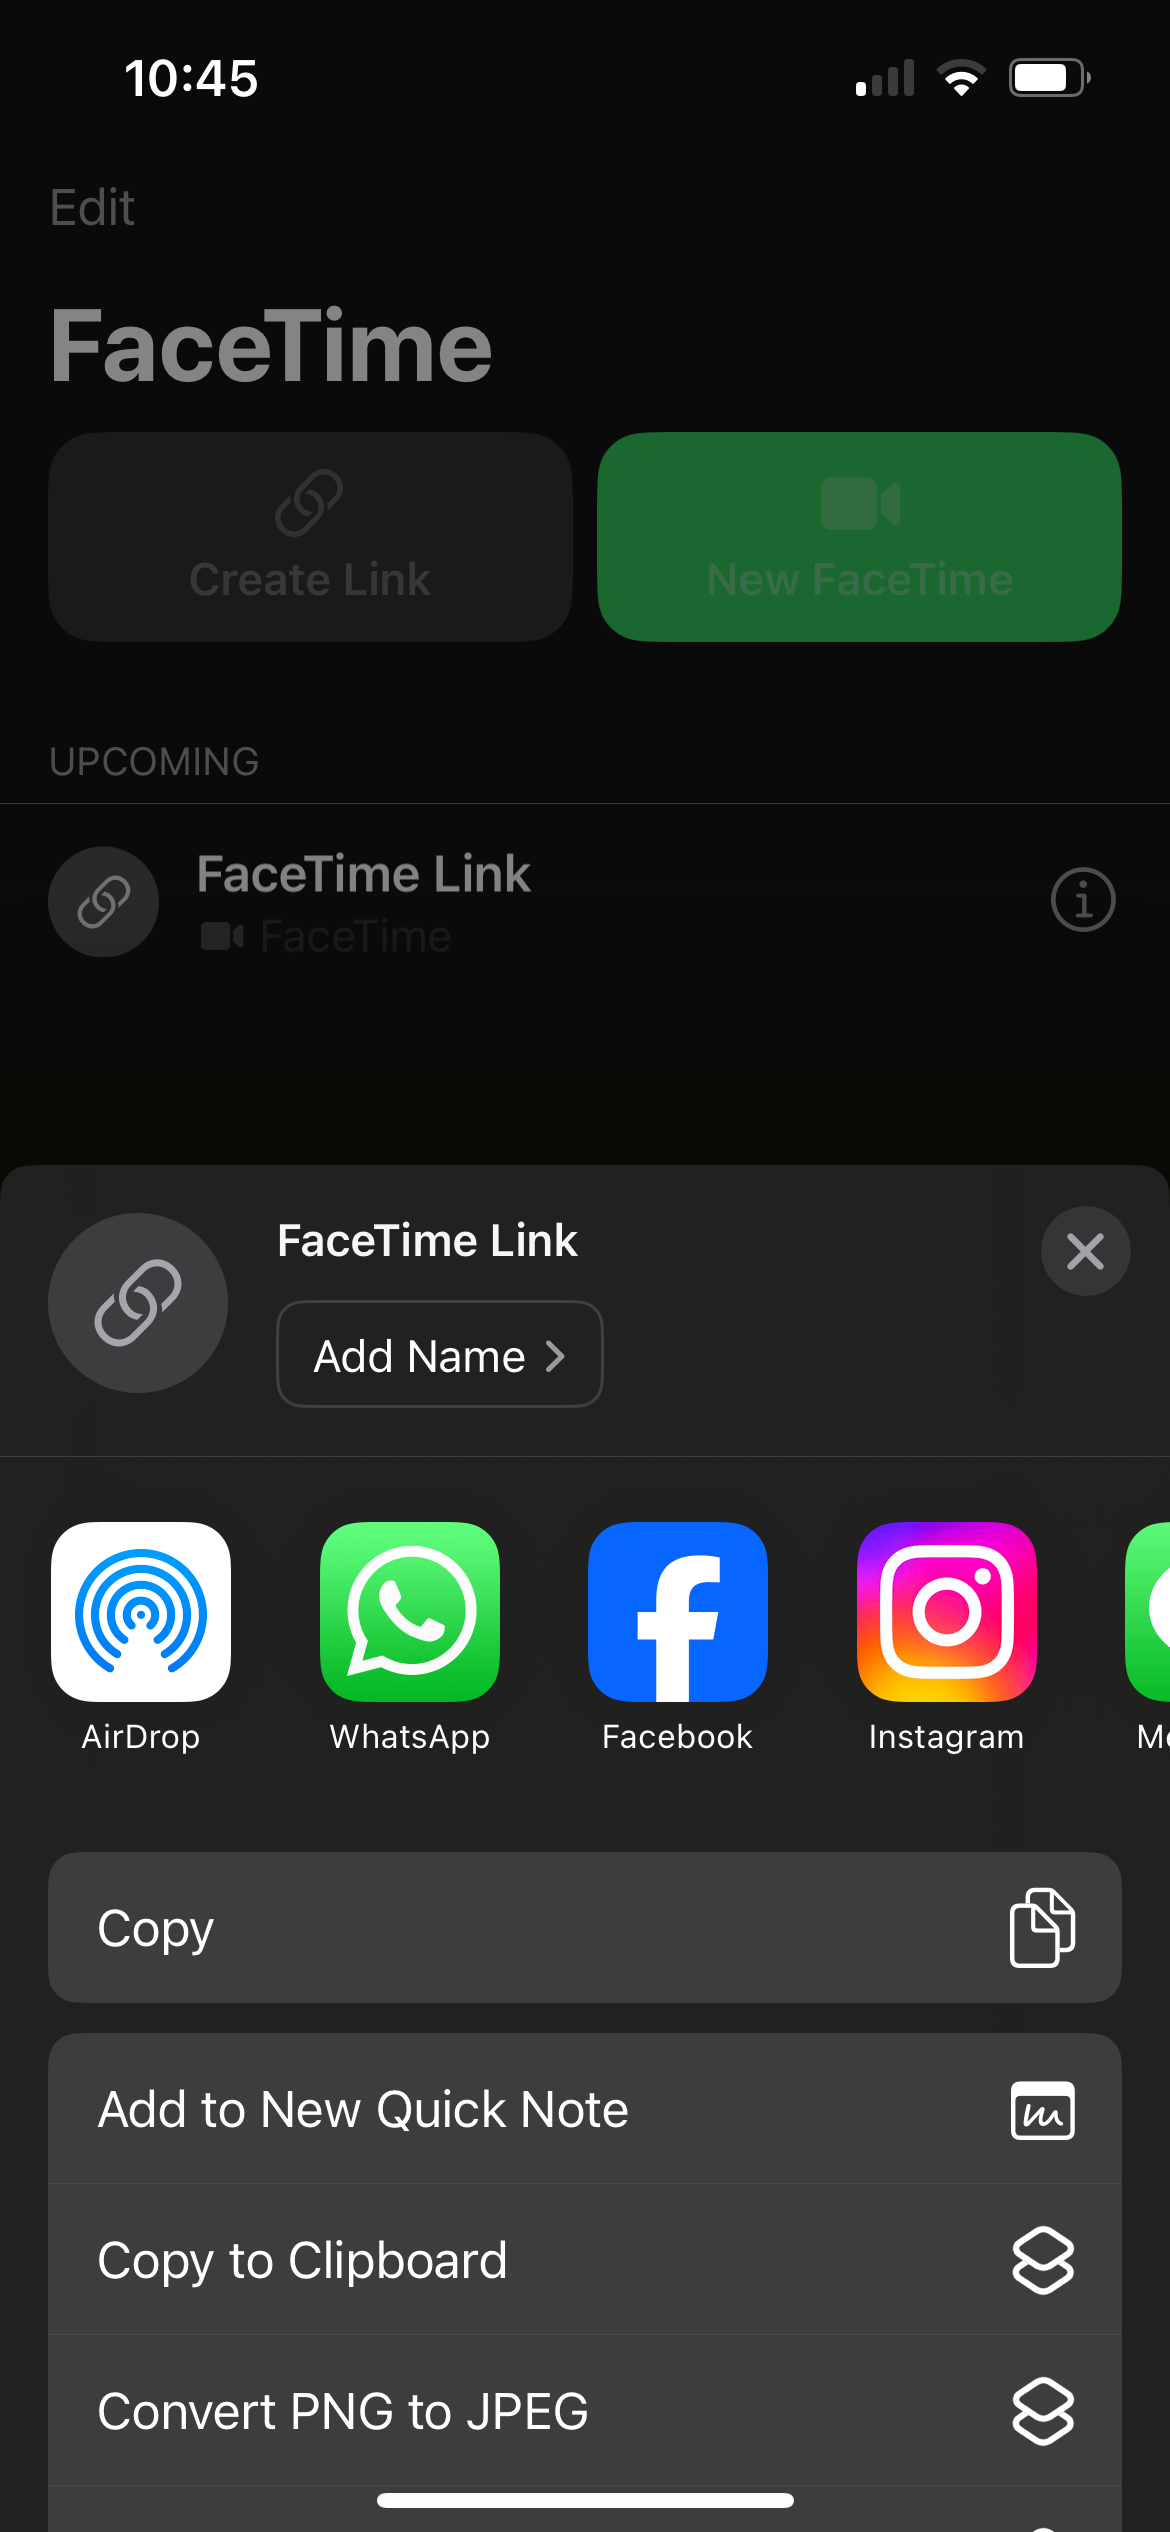 Share sheet in iPhone FaceTime app